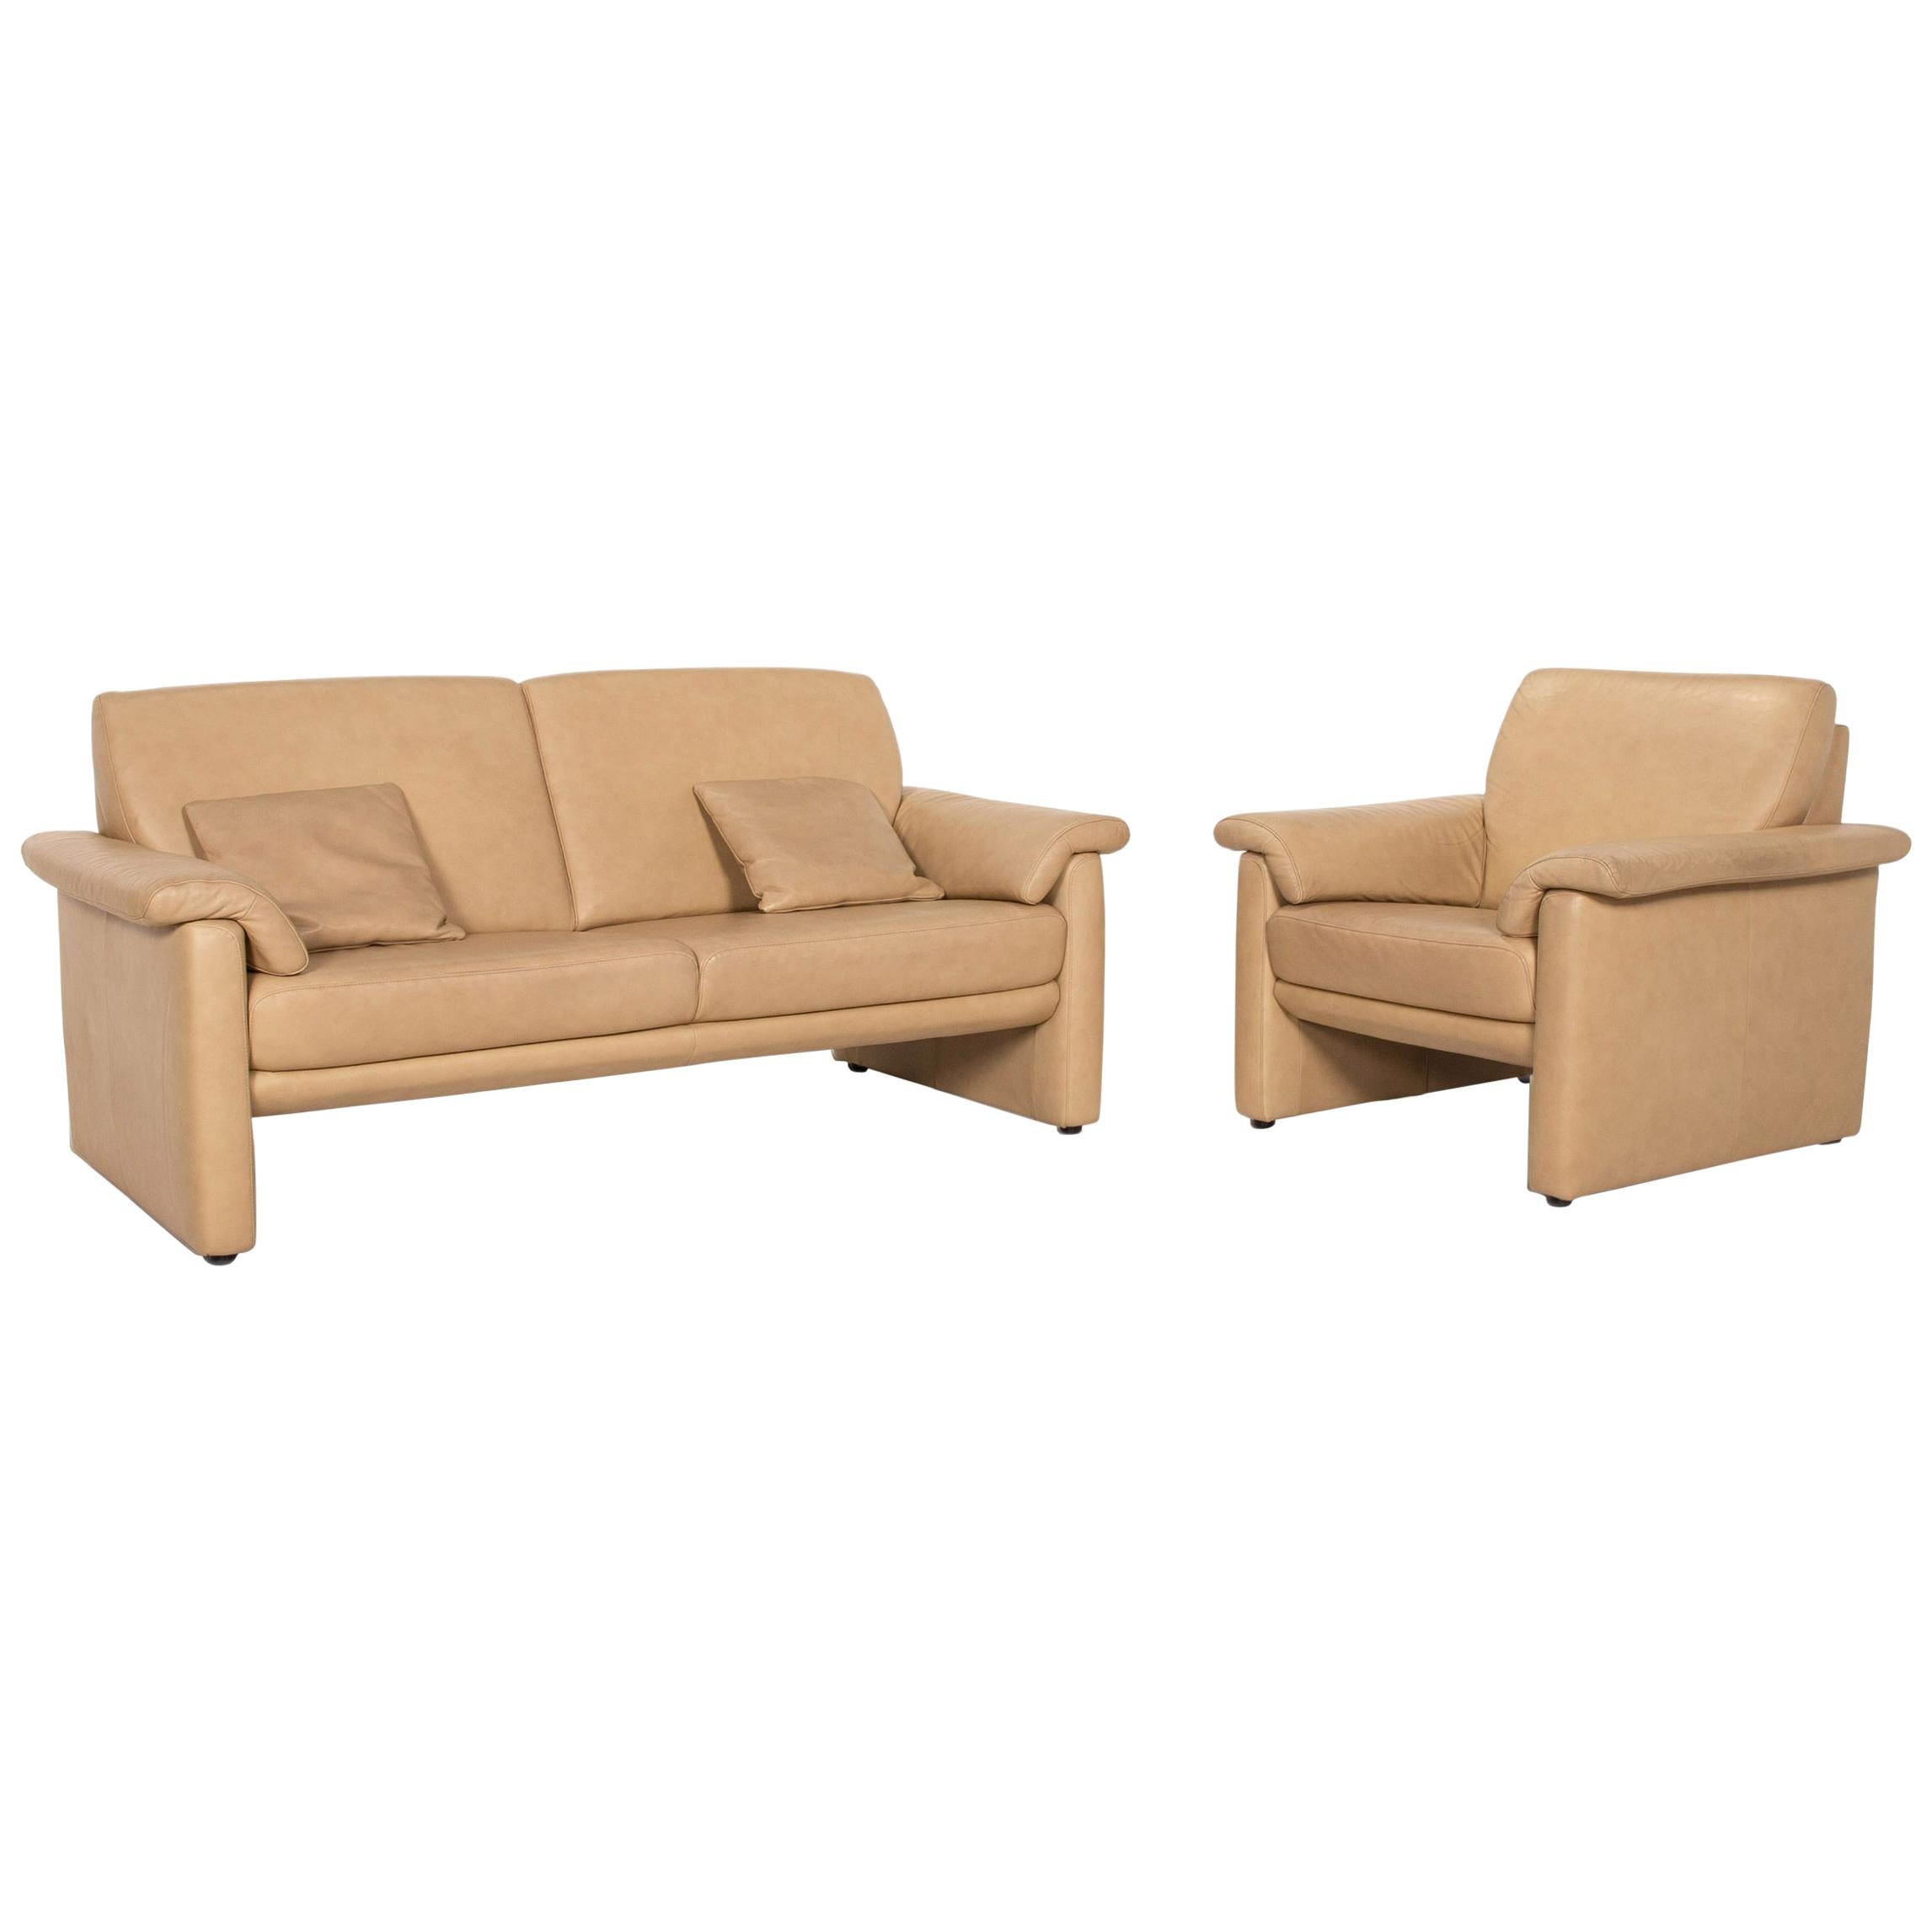 Willi Schillig Lucca Leather Sofa Set Beige 1 Two-Seat 1 Armchair For Sale